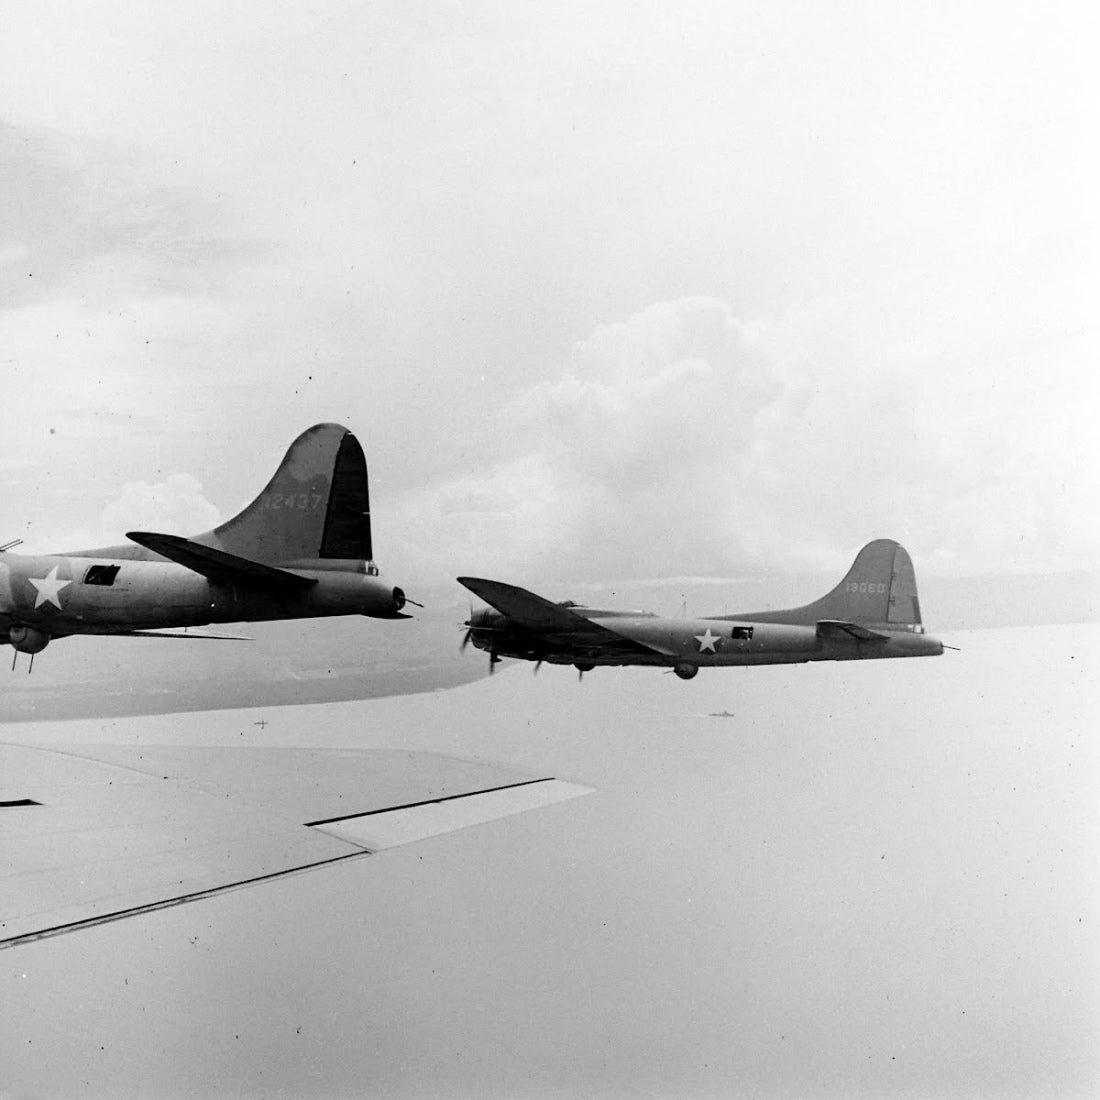 SPECIAL Boeing B-17E 'Naughty But Nice' s/n 41-2430 Pearl Harbor Veter